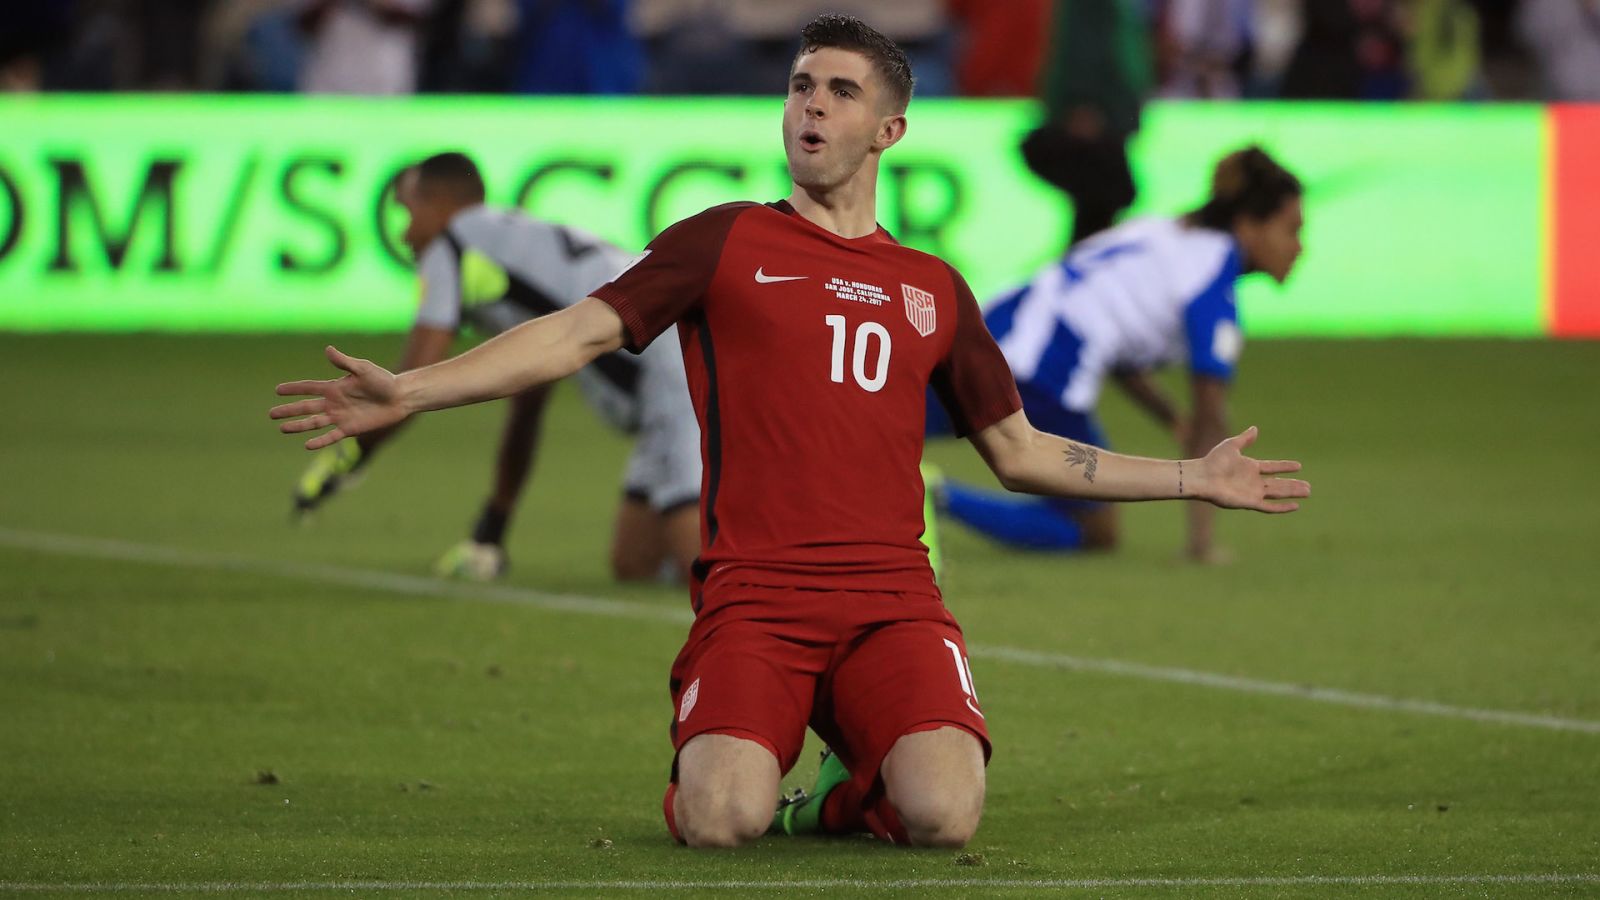 A New Superstar Rises in the States, and His Name is Christian Pulisic